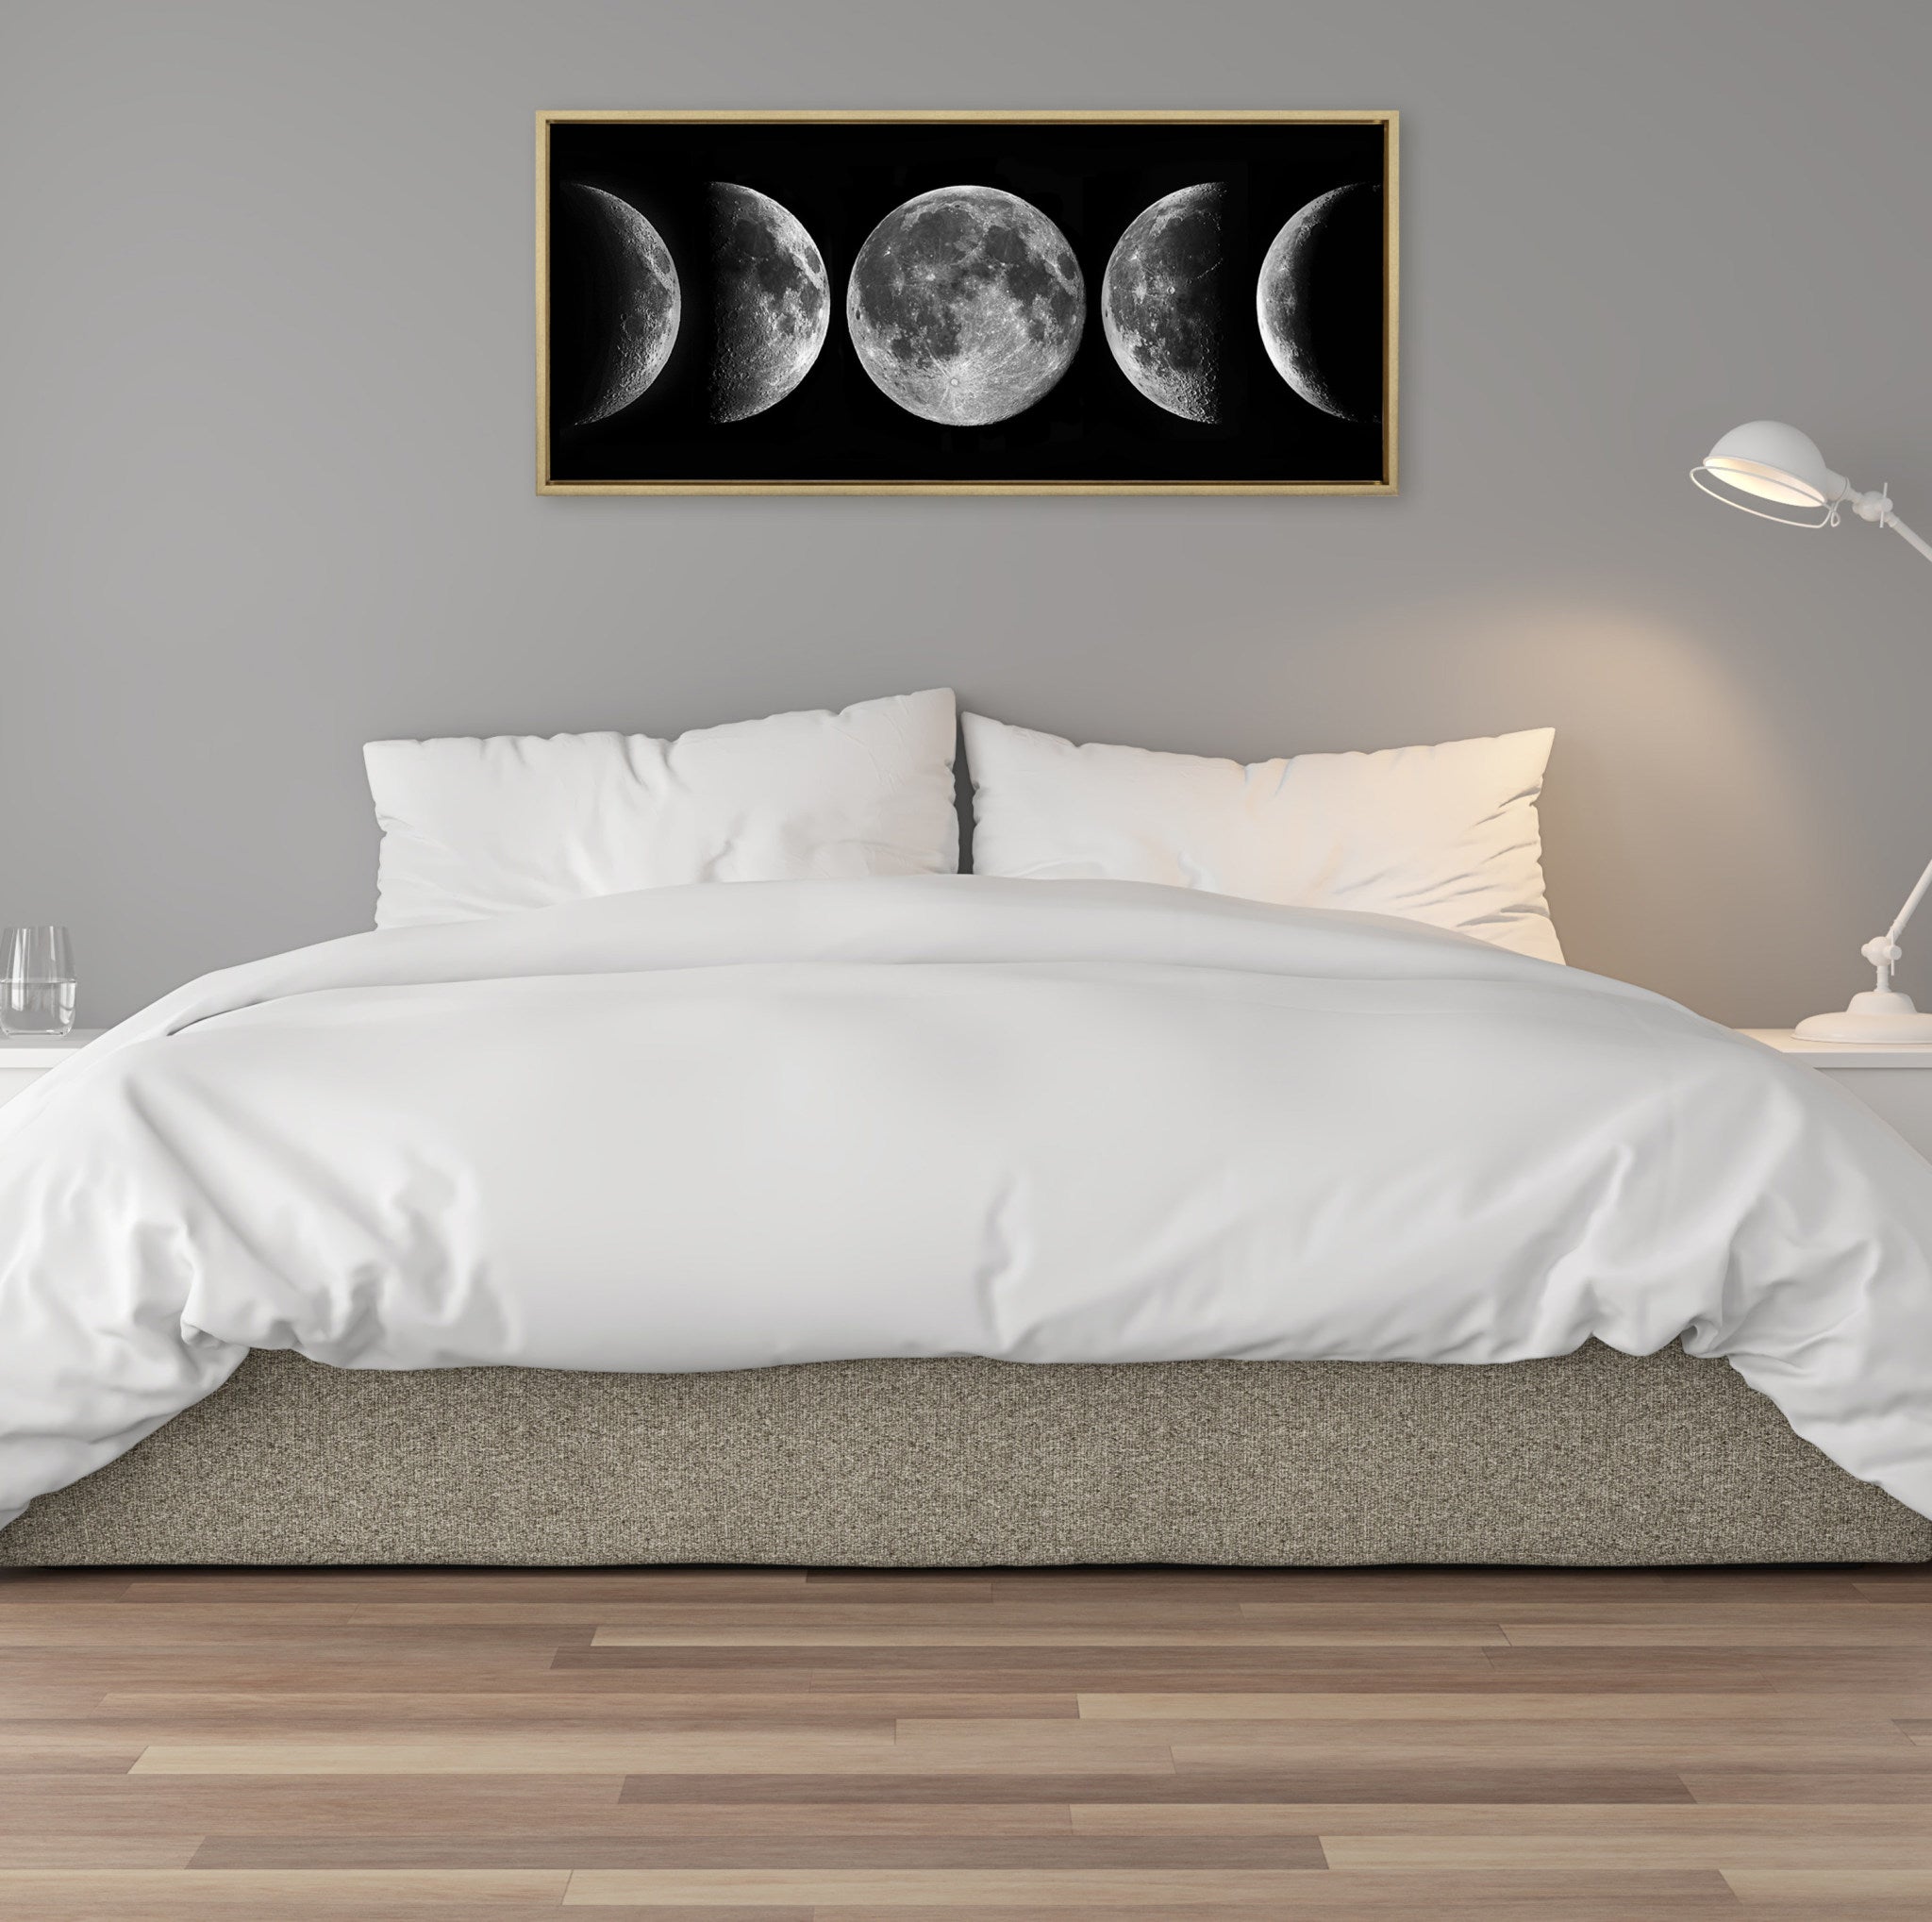 Sylvie Phases of the Moon Framed Canvas by The Creative Bunch Studio